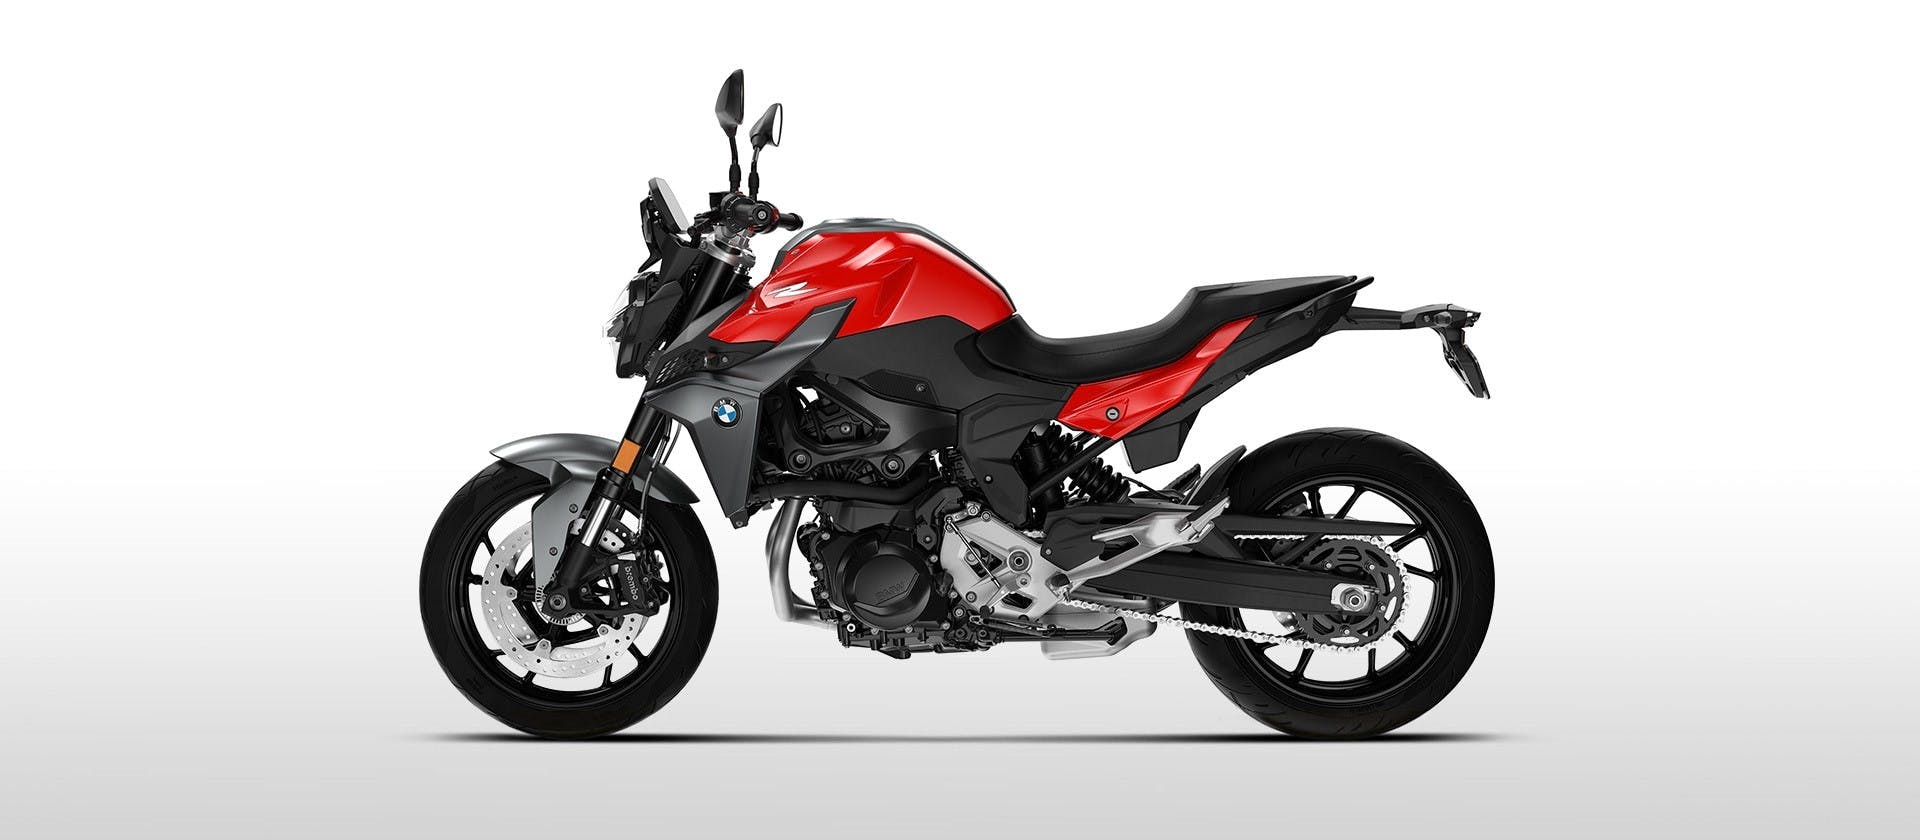 BMW F 900 R Exclusive in racing red colour